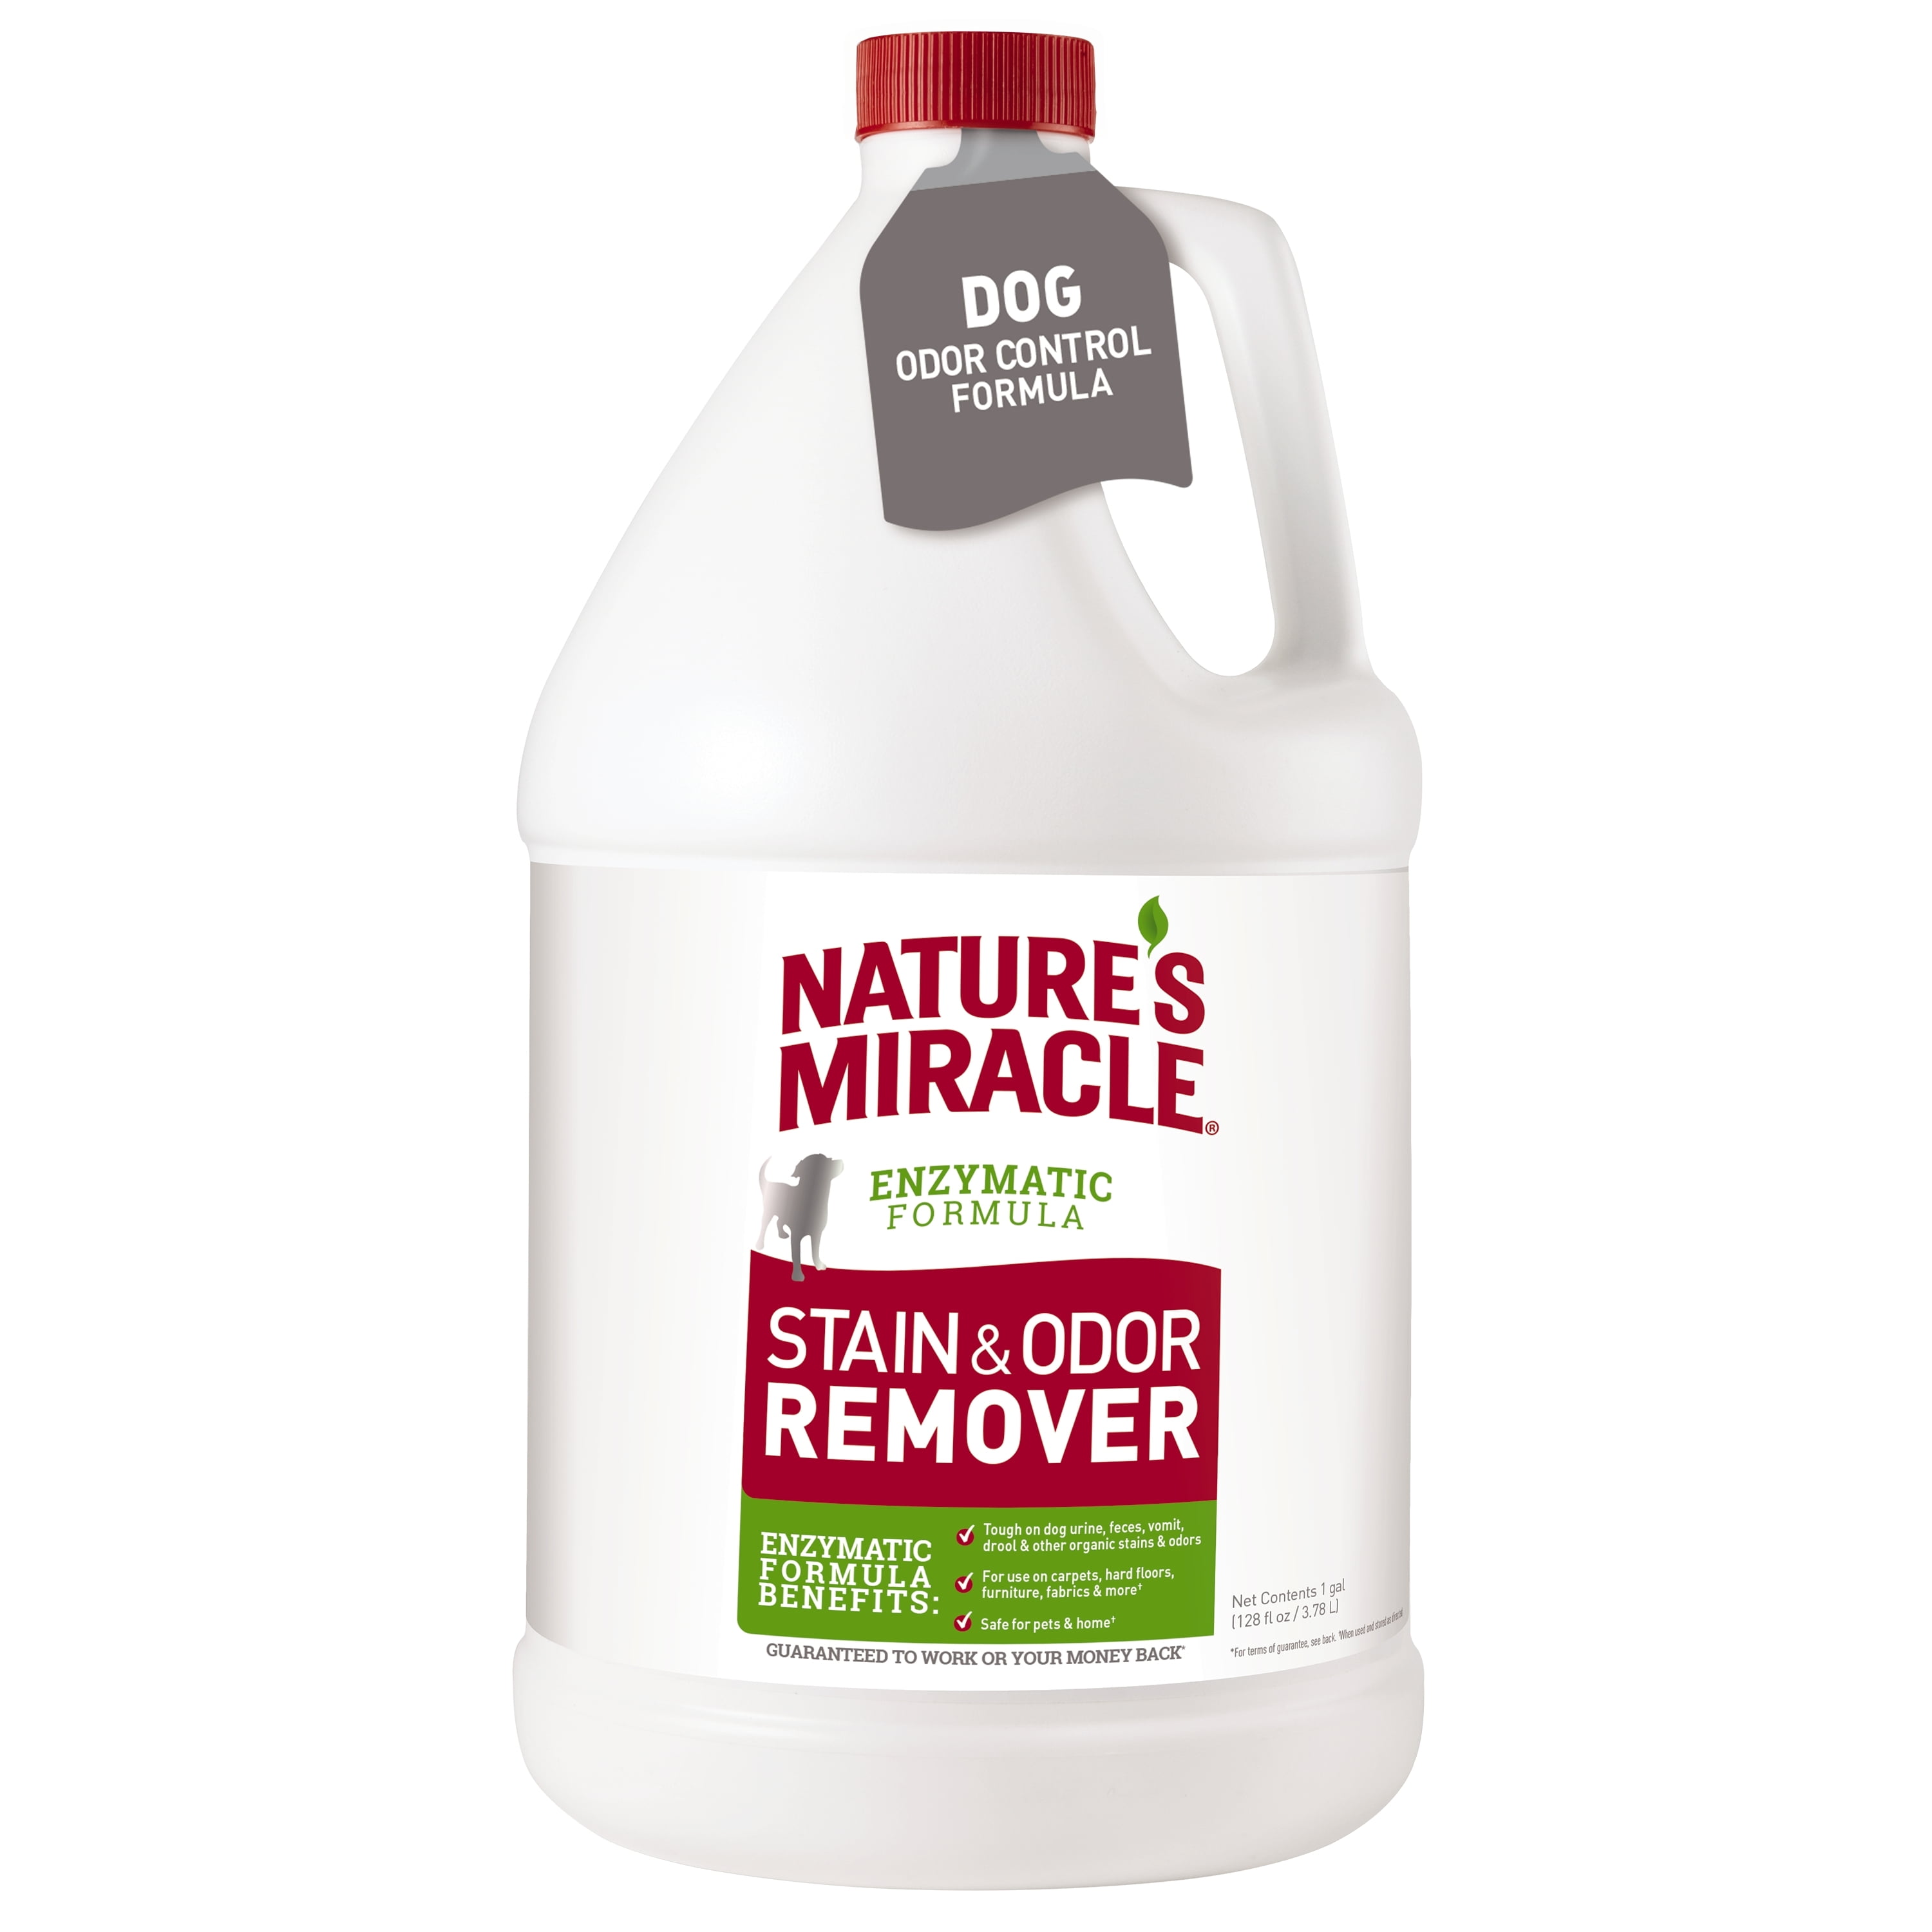 Hard Floor Pet Stain And Odor Remover, Pet Stain And Odor Remover For Hardwood Floors